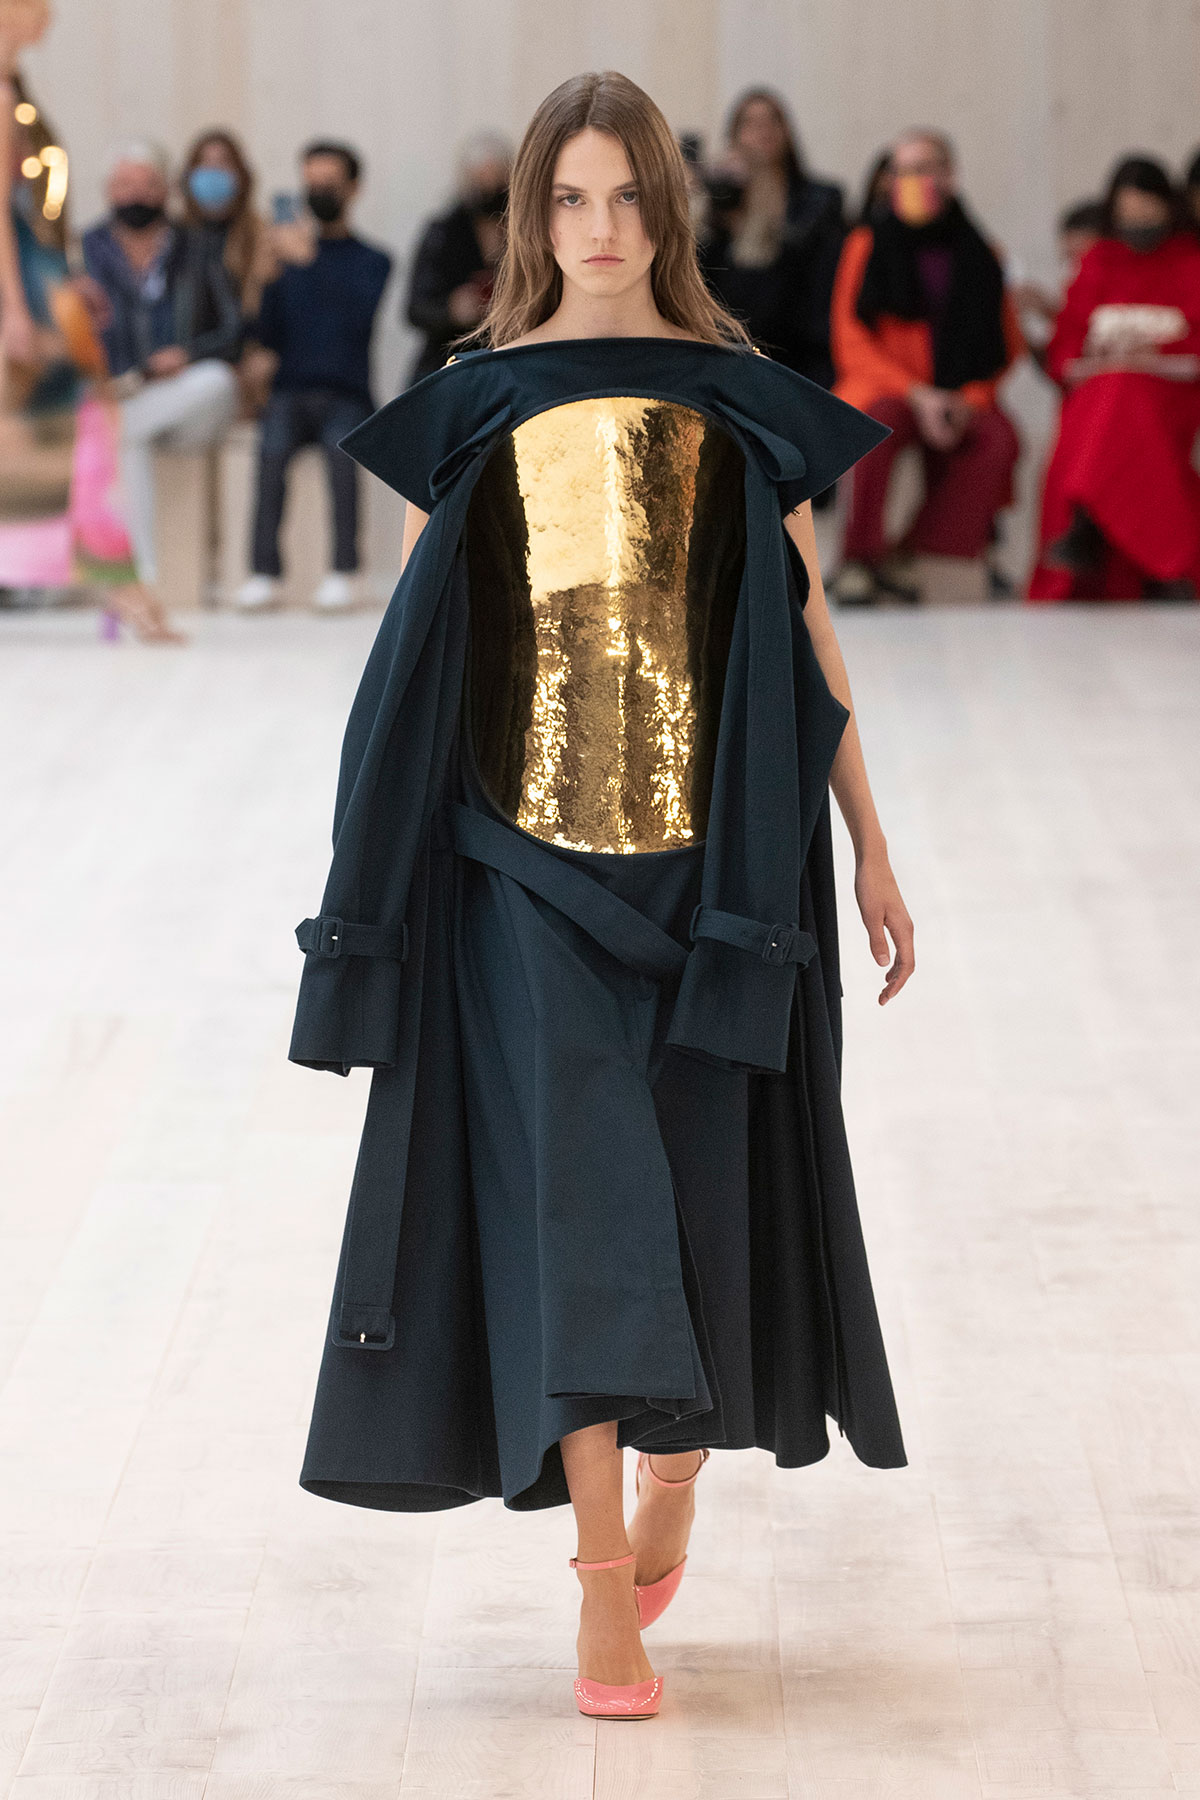 LOEWE Spring Summer 2022 Collection | The Fashionography